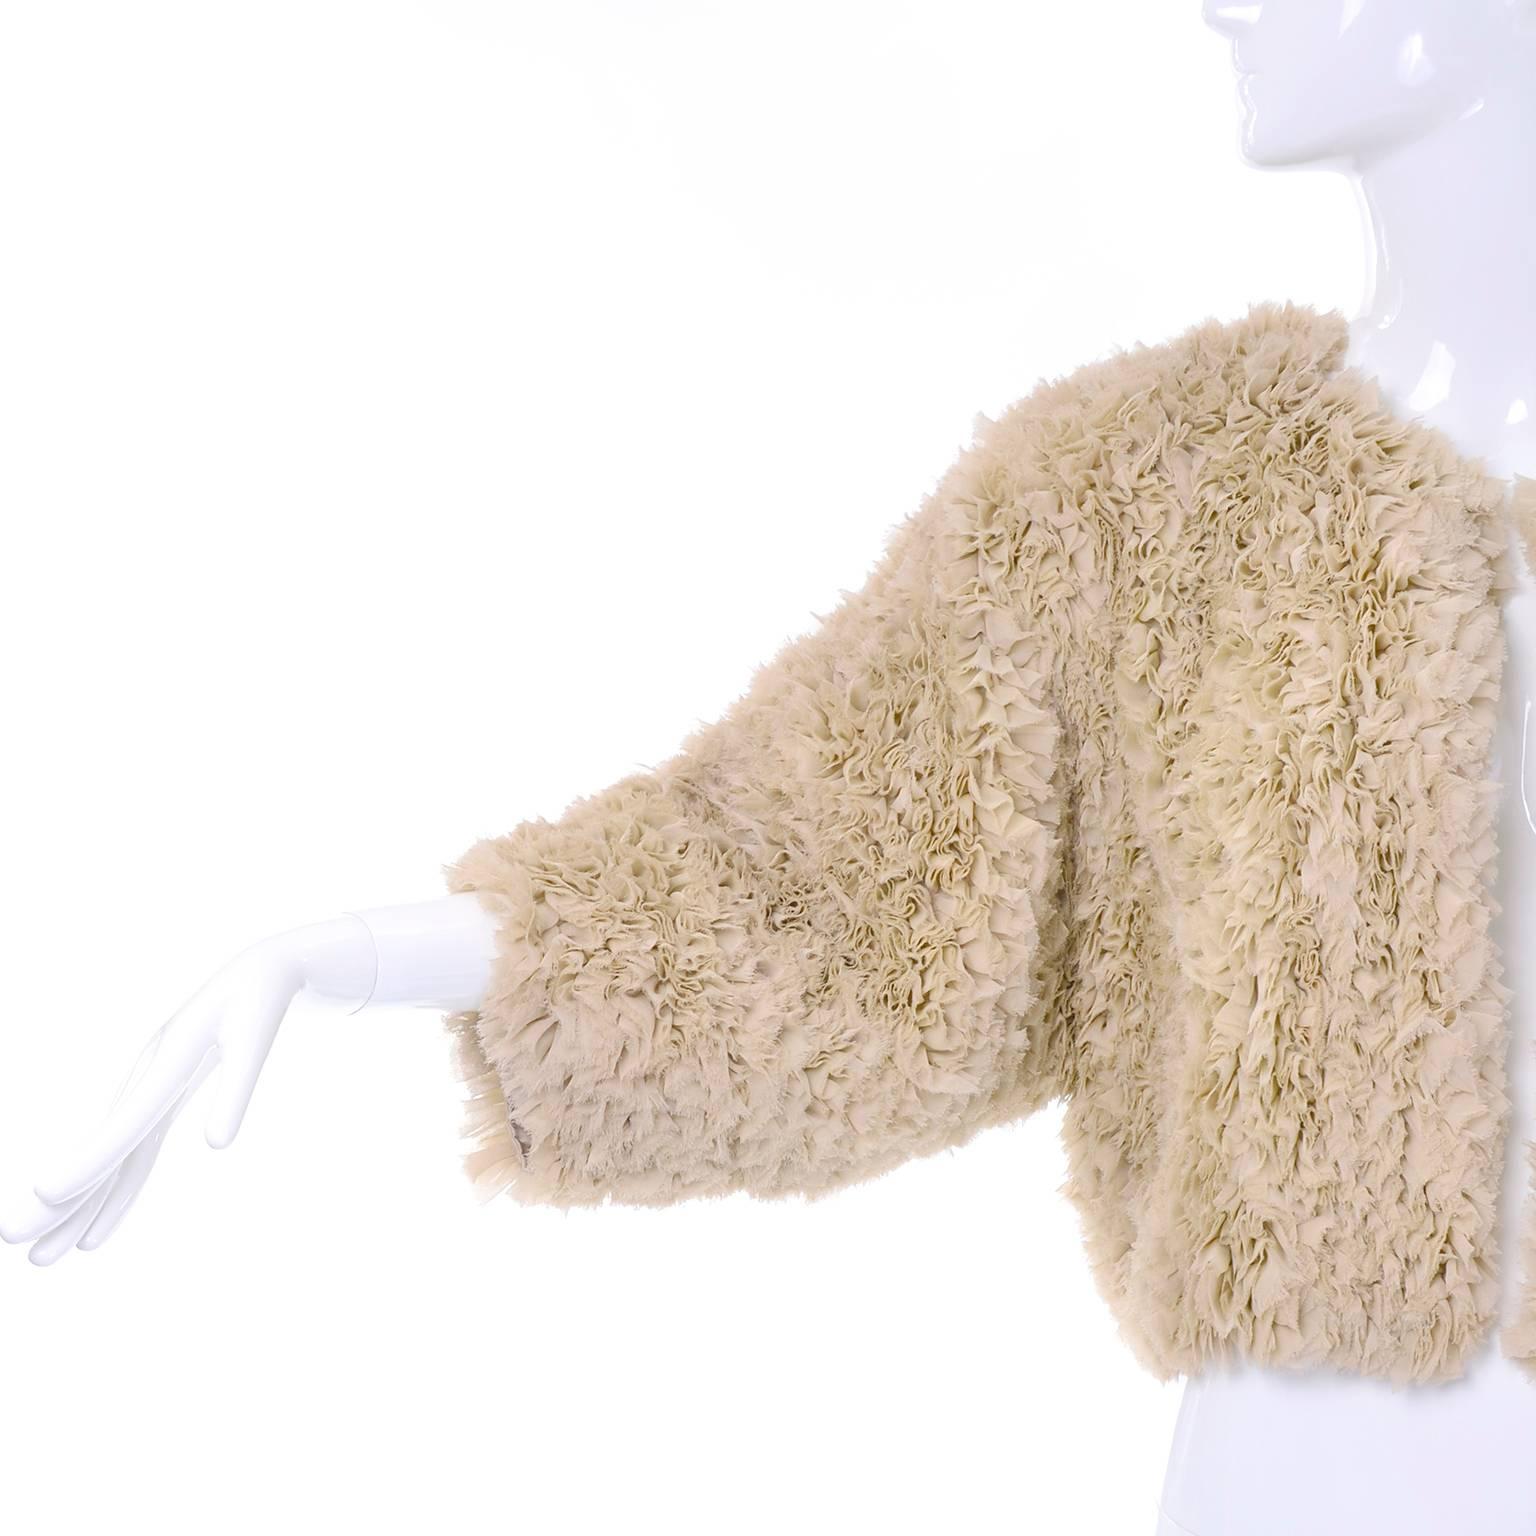 This fabulous Sonia Rykiel jacket is made of raw edged silk ruffles creating a unique texture over the entire piece. This beautiful designer jacket is slightly cropped, open in the front, and lined in silk, with raglan 3/4 length sleeves. Made in